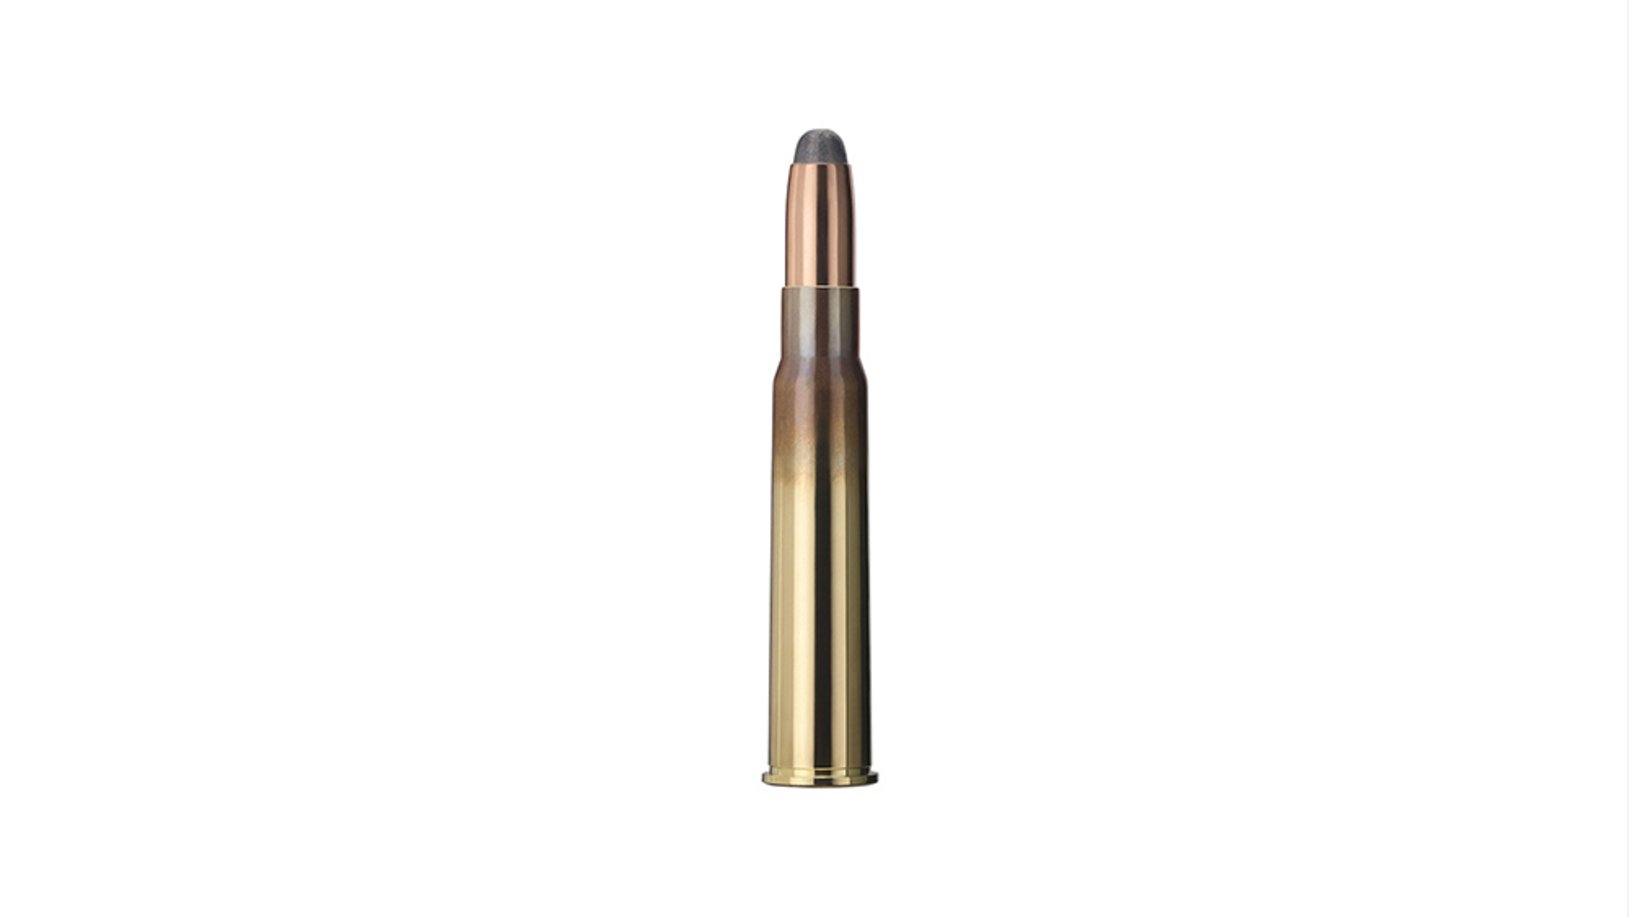 Single bullet view of GECO 8x57 JRS SOFTPOINT 12,0g